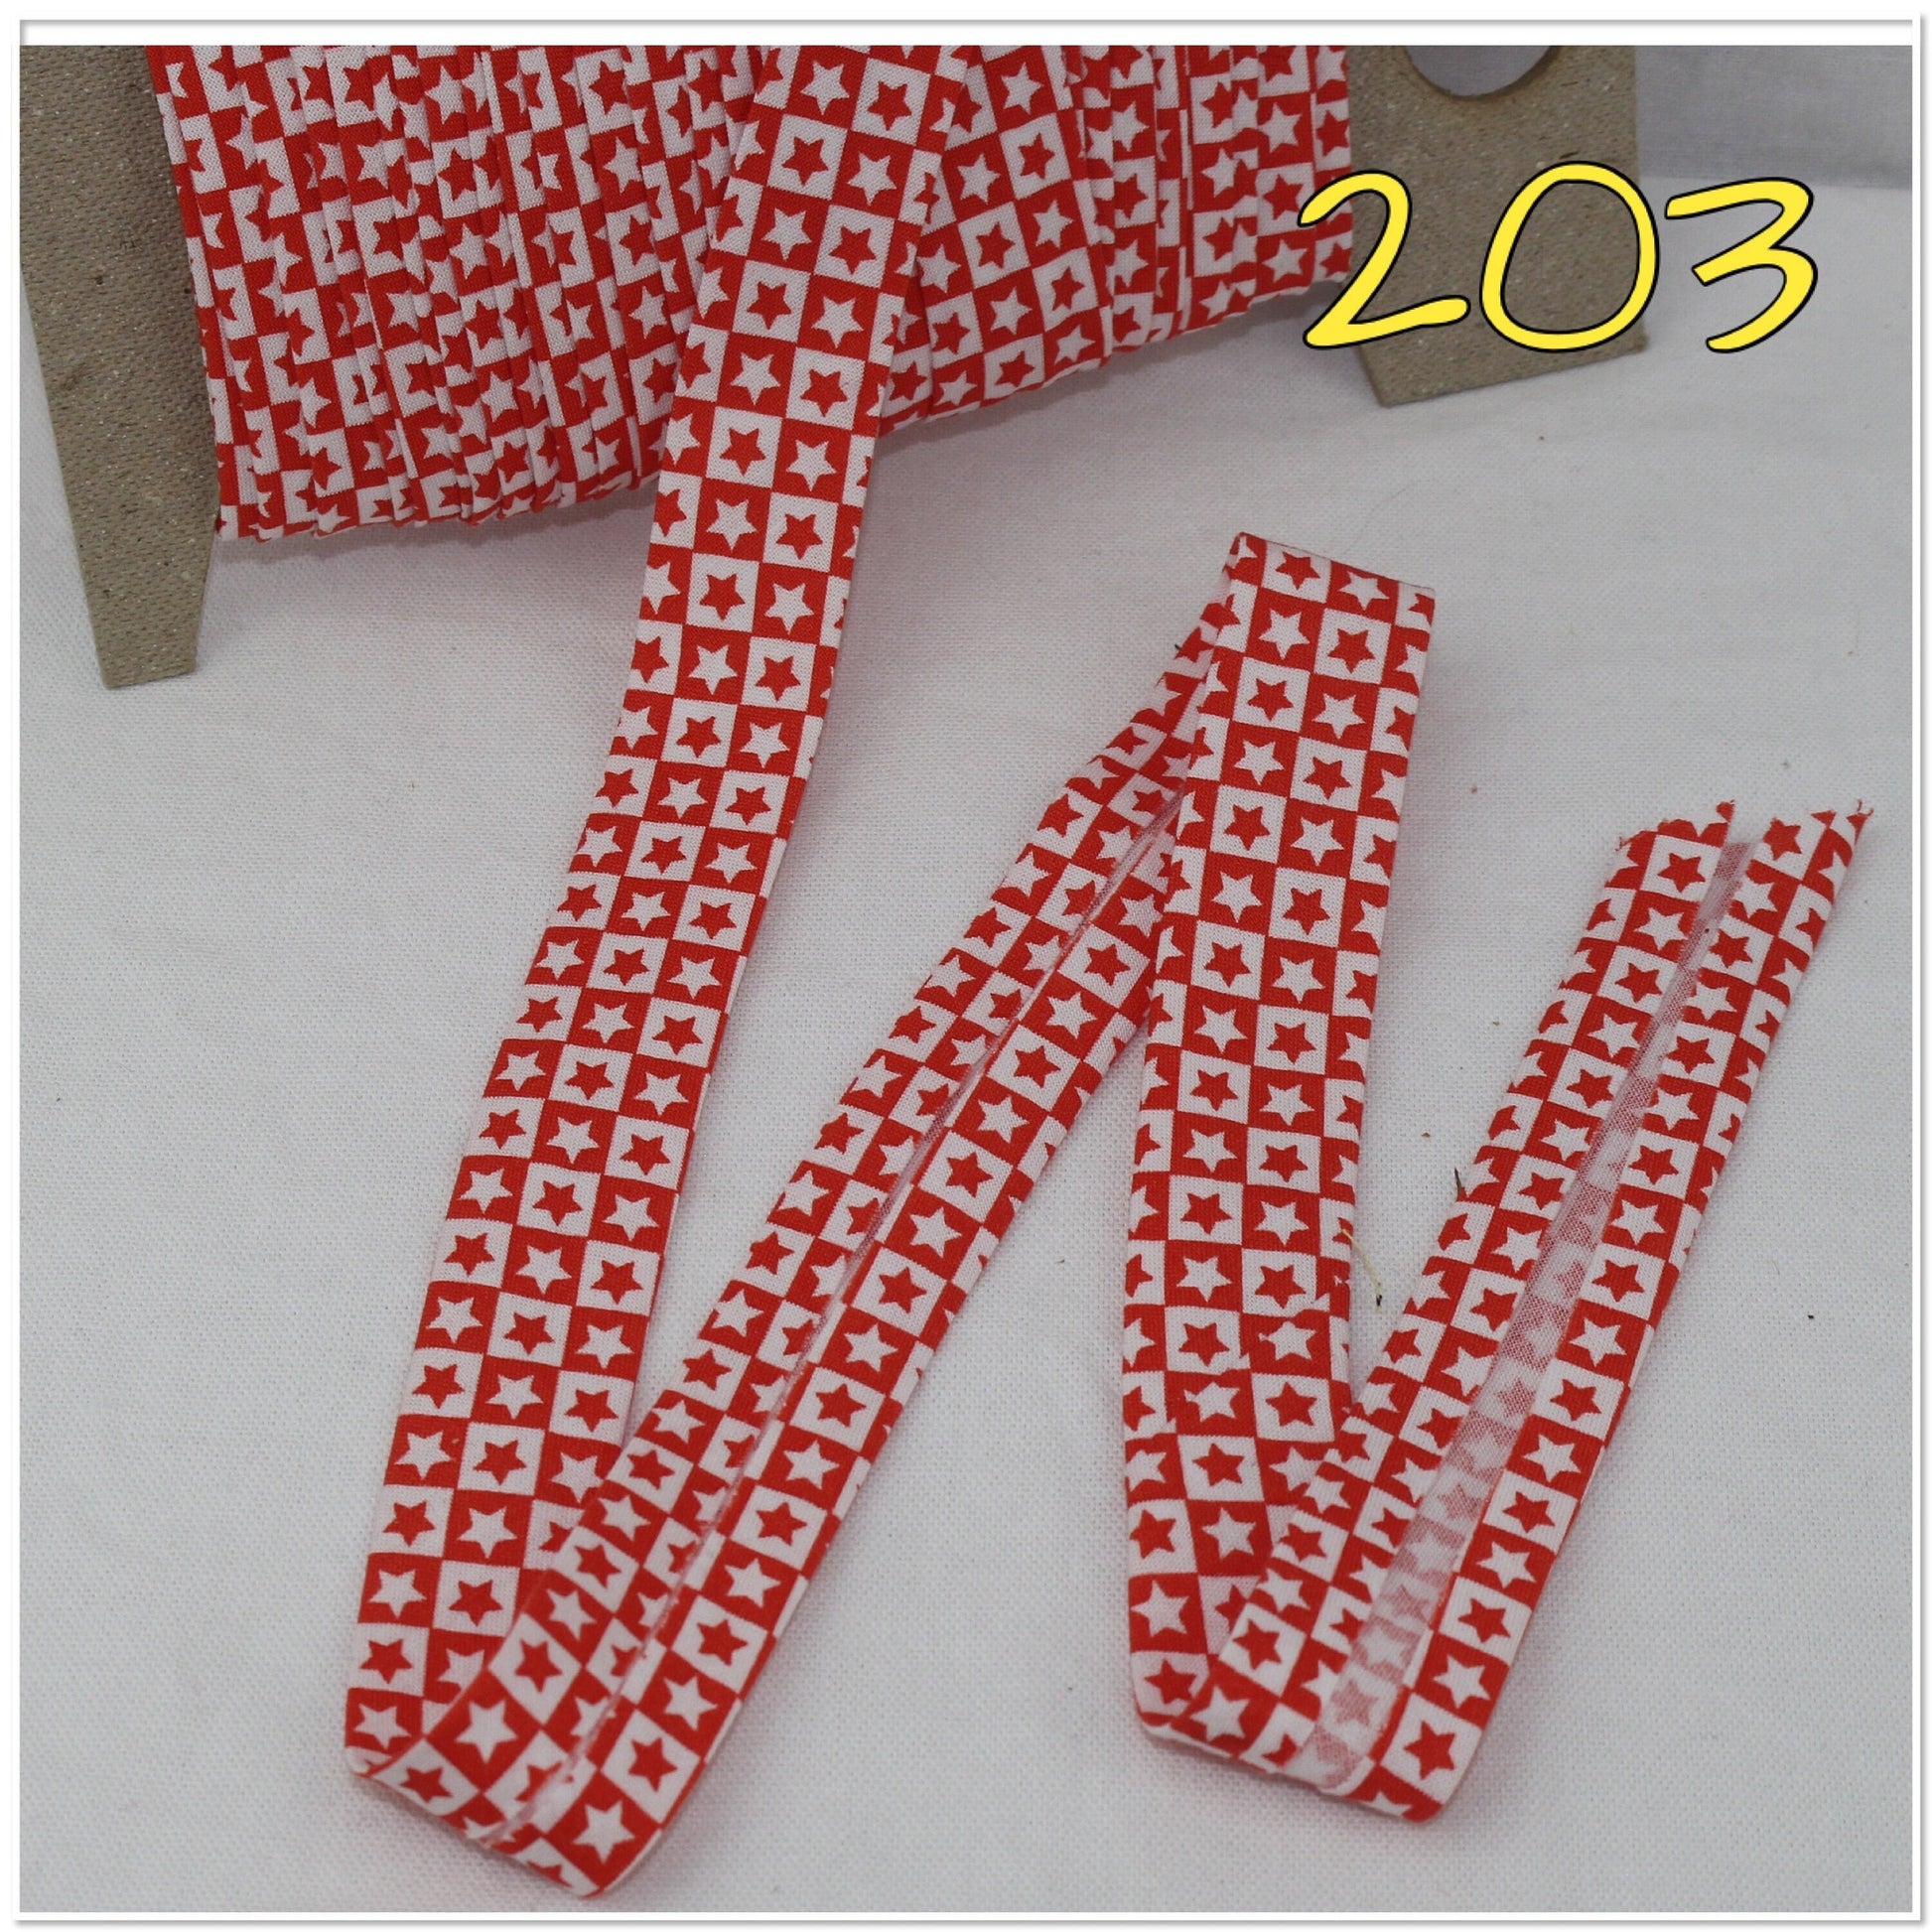 Bias Binding (Tape) 25mm, Cotton, Single Fold, red, yellow. Fusible iron on available.